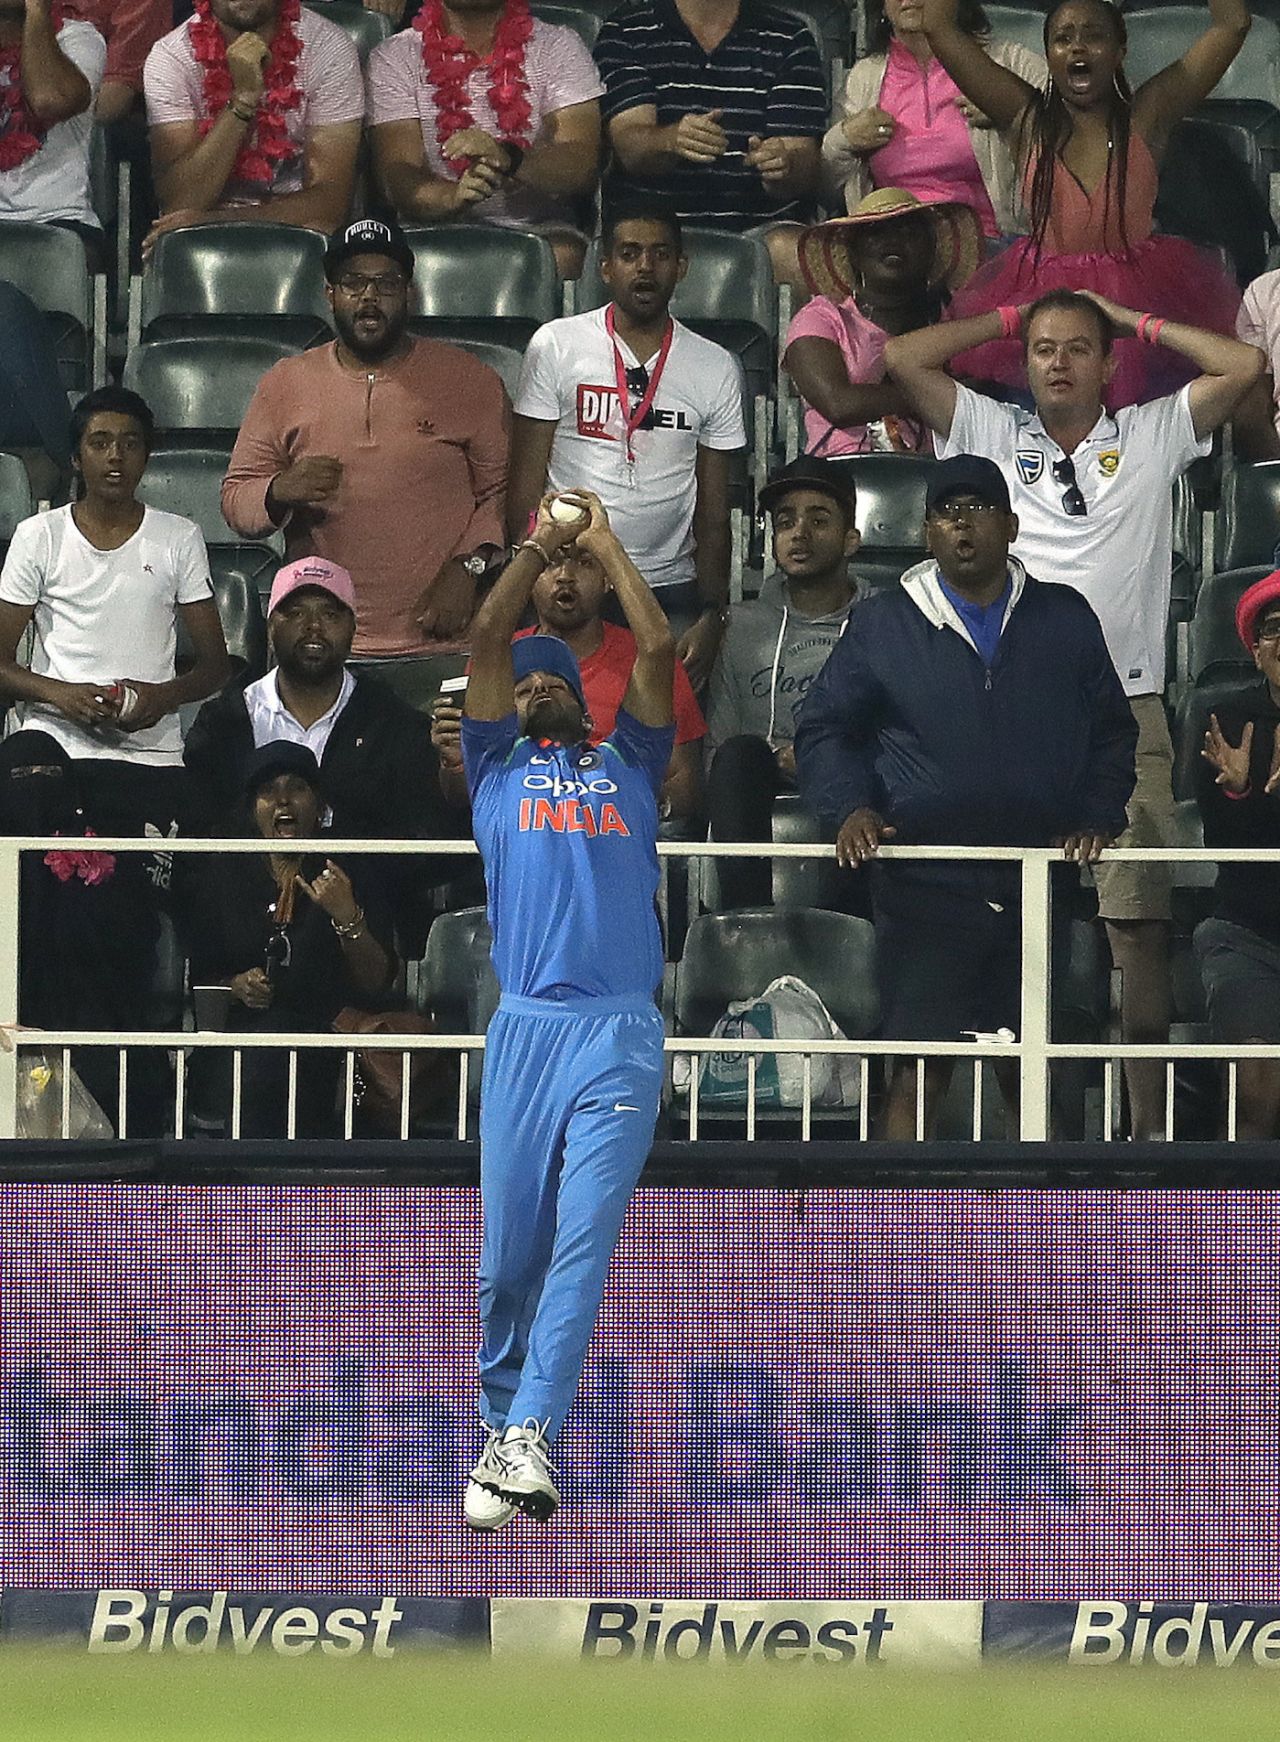 Bhuvneshwar Kumar completed a spectacular catch in the deep, South Africa v India, 4th ODI, Johannesburg, February 10, 2018